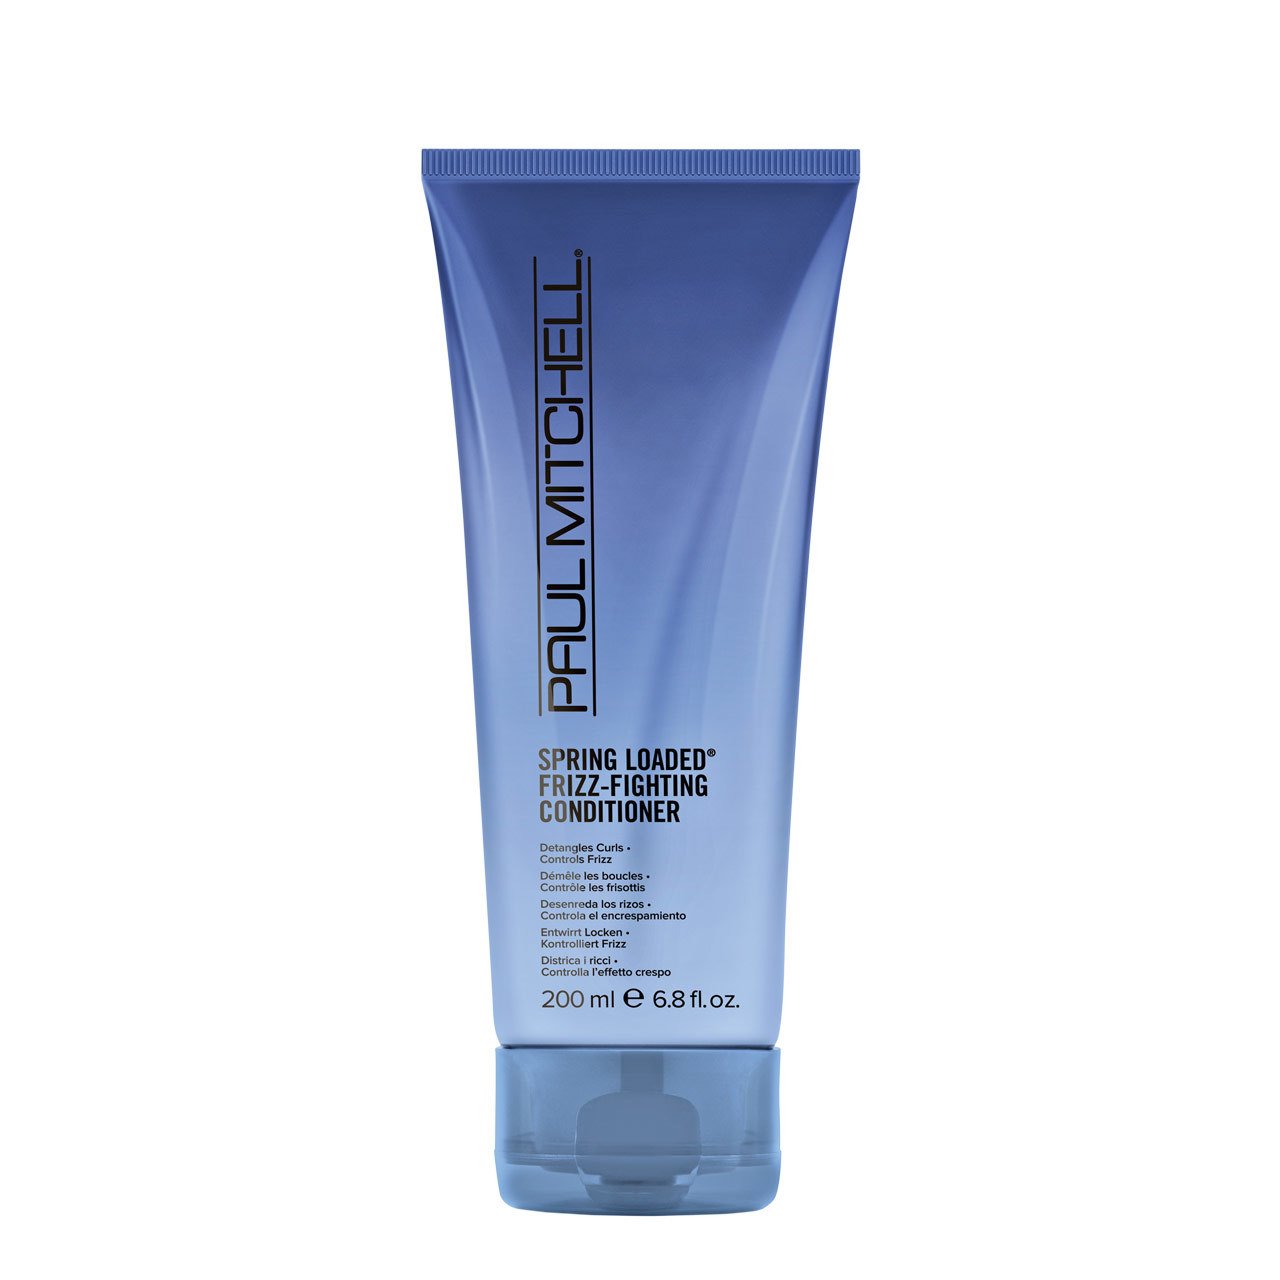 Paul Mitchell - Spring Loaded Frizz-Fighting Conditioner 200ml